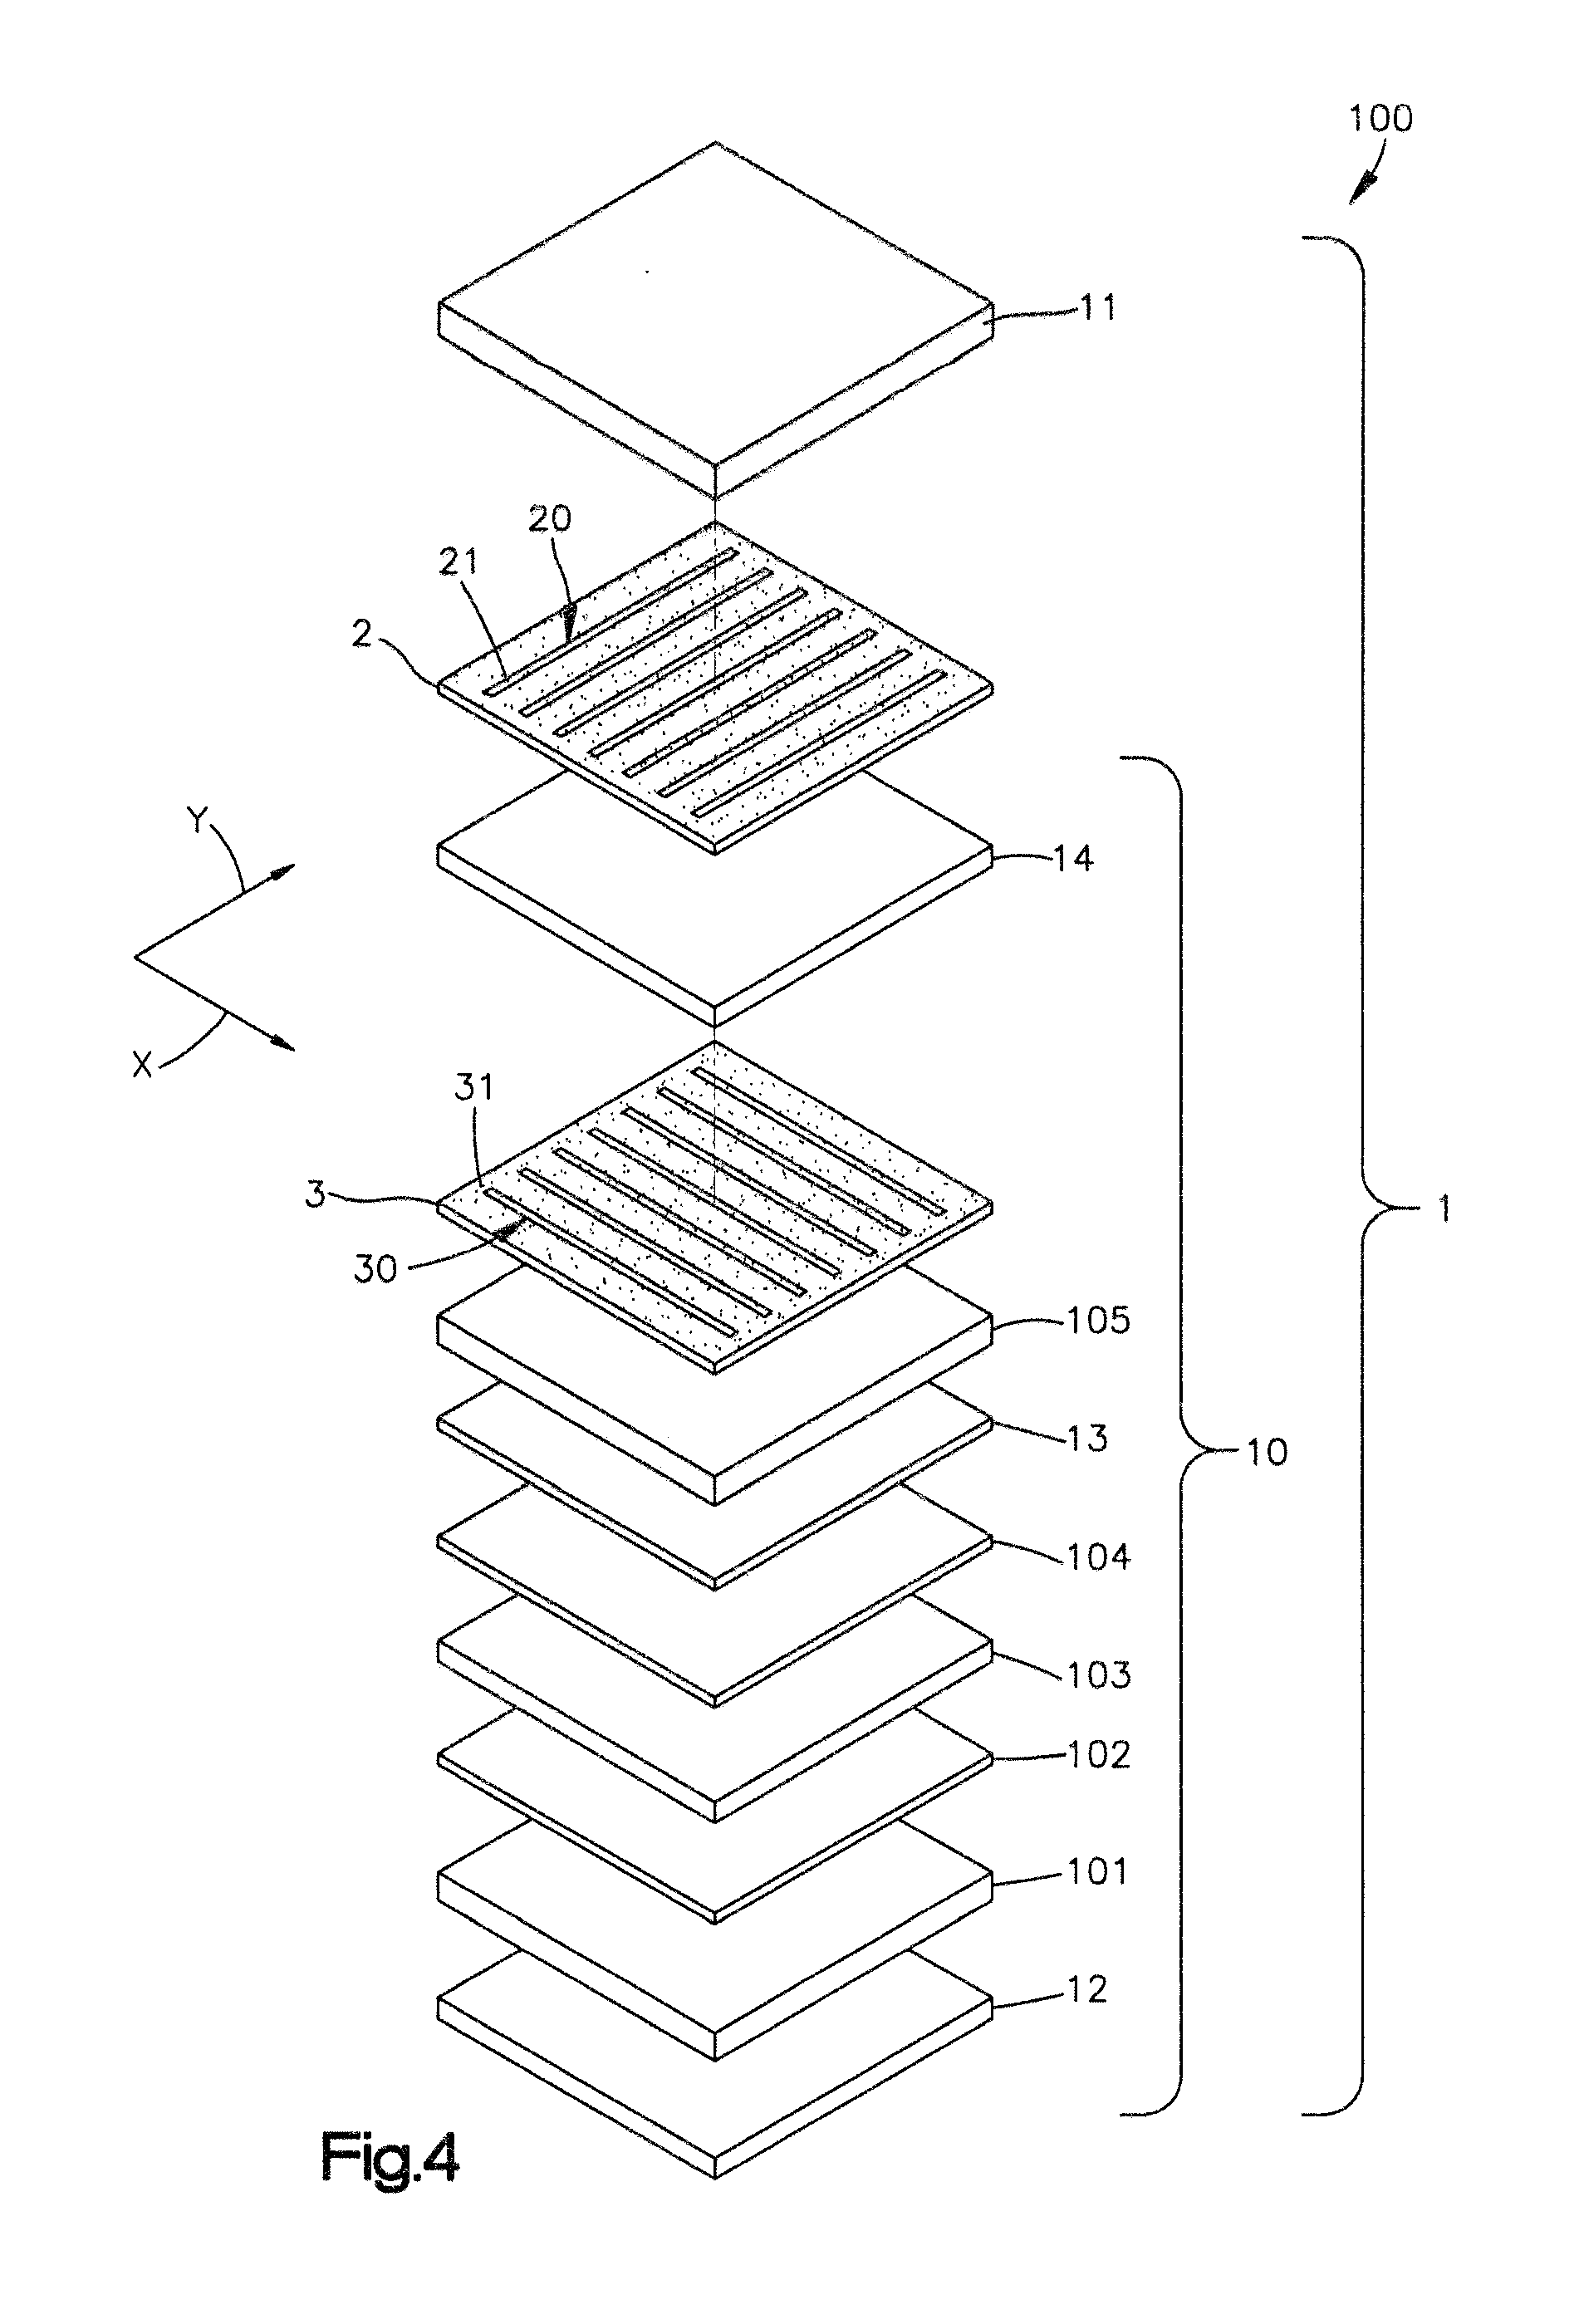 Liquid crystal display integrated with capacitive touch devices